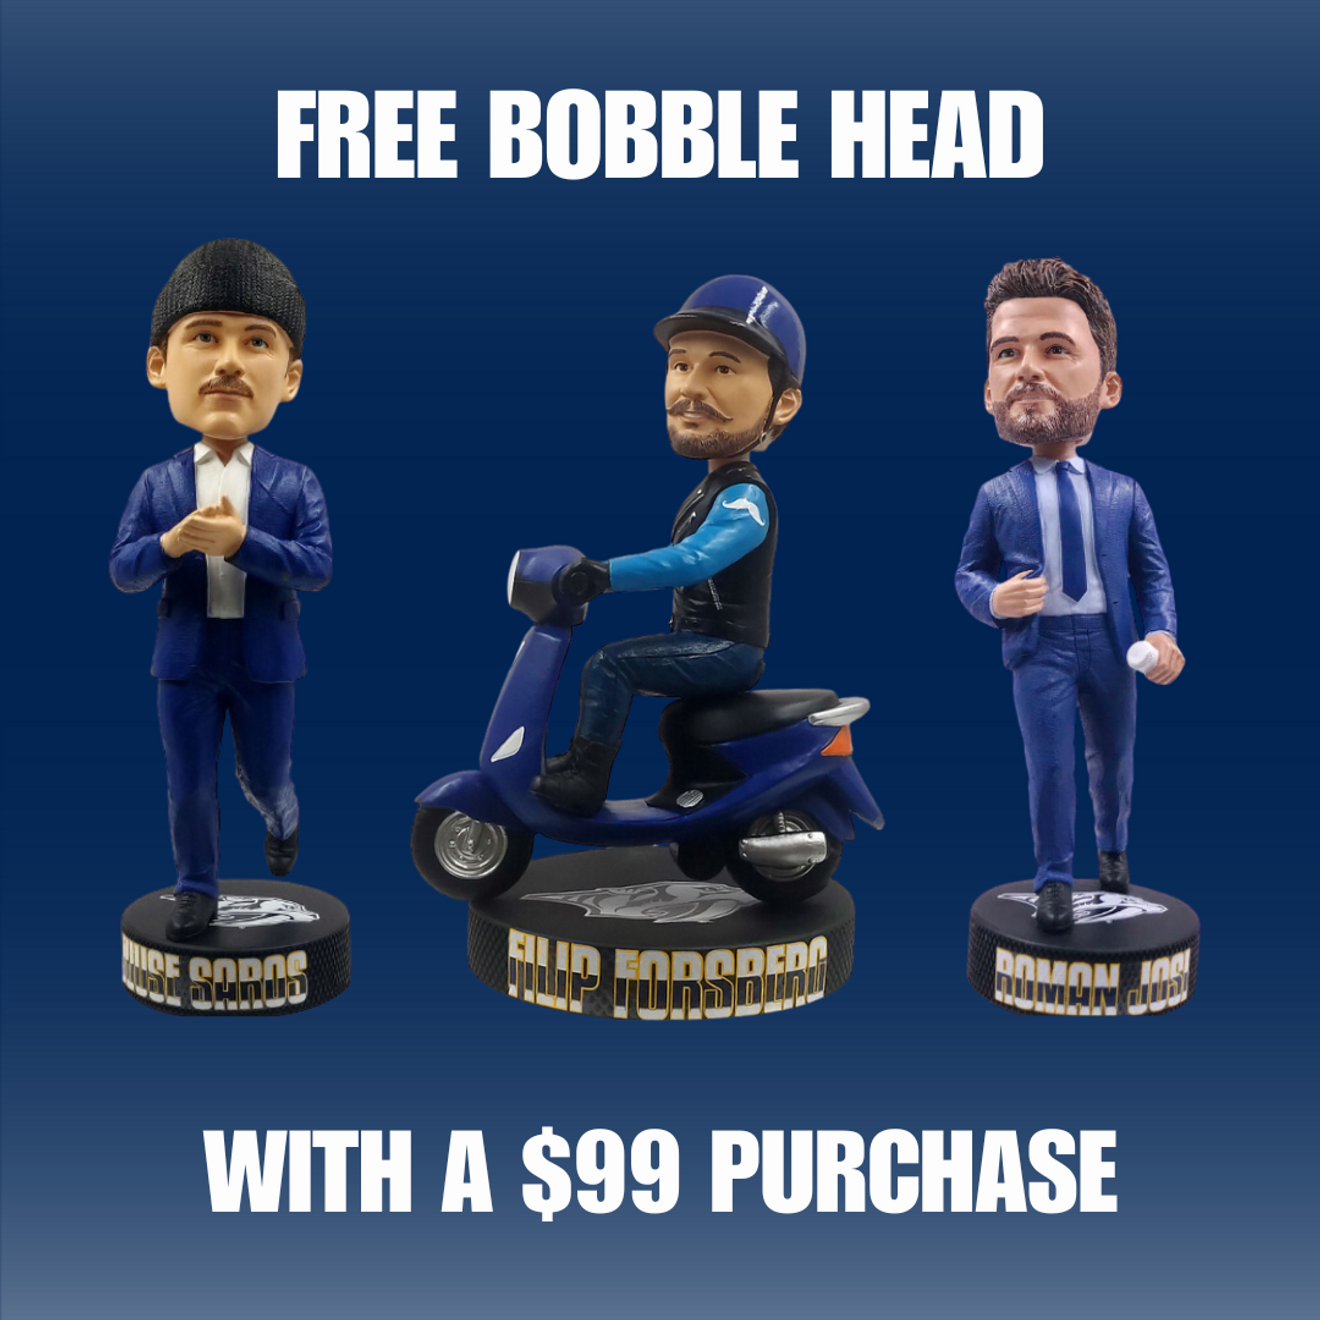 FREE BOBBLEHEAD WITH $99 PURCHASE